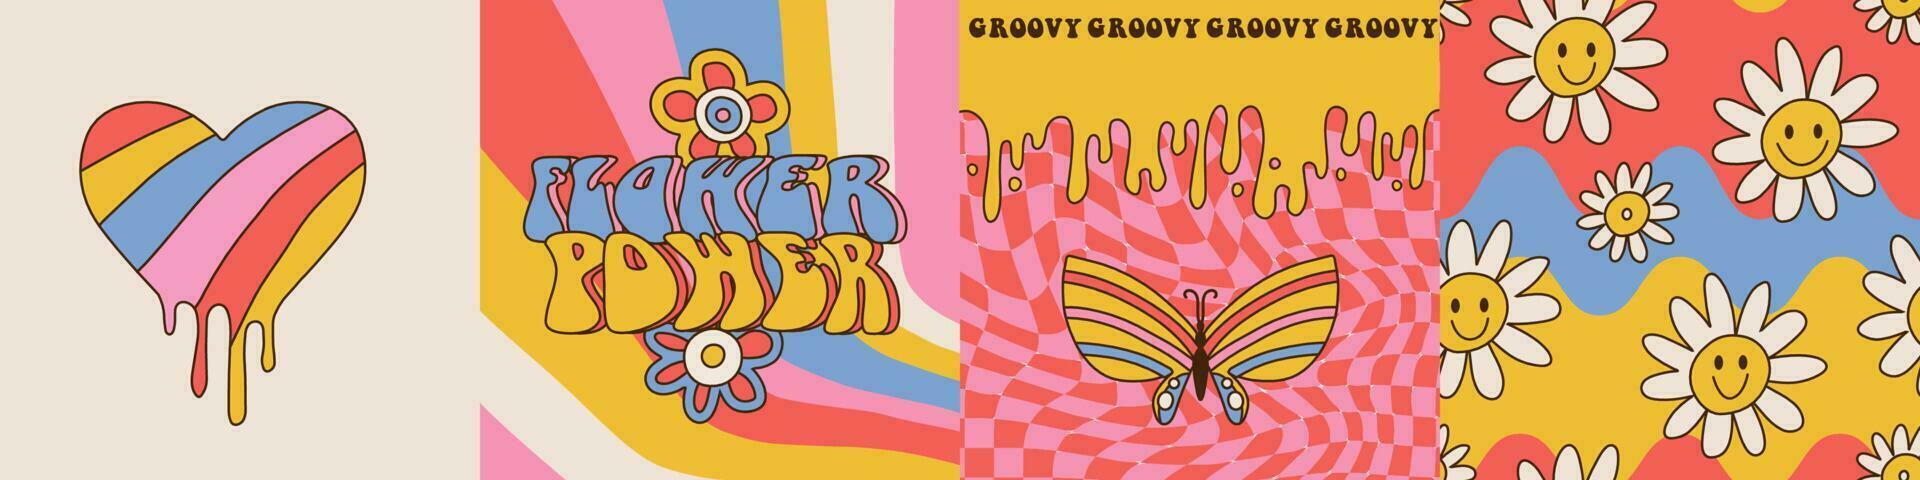 Groovy Hippie 70s square cards Set . Flower power Trippy Psychedelic banners - Daisy Flowers, Melting Wavy Stripes in Retro Cartoon Style for Case Phone, Posters, Cards, Social media Stories. Vector. vector